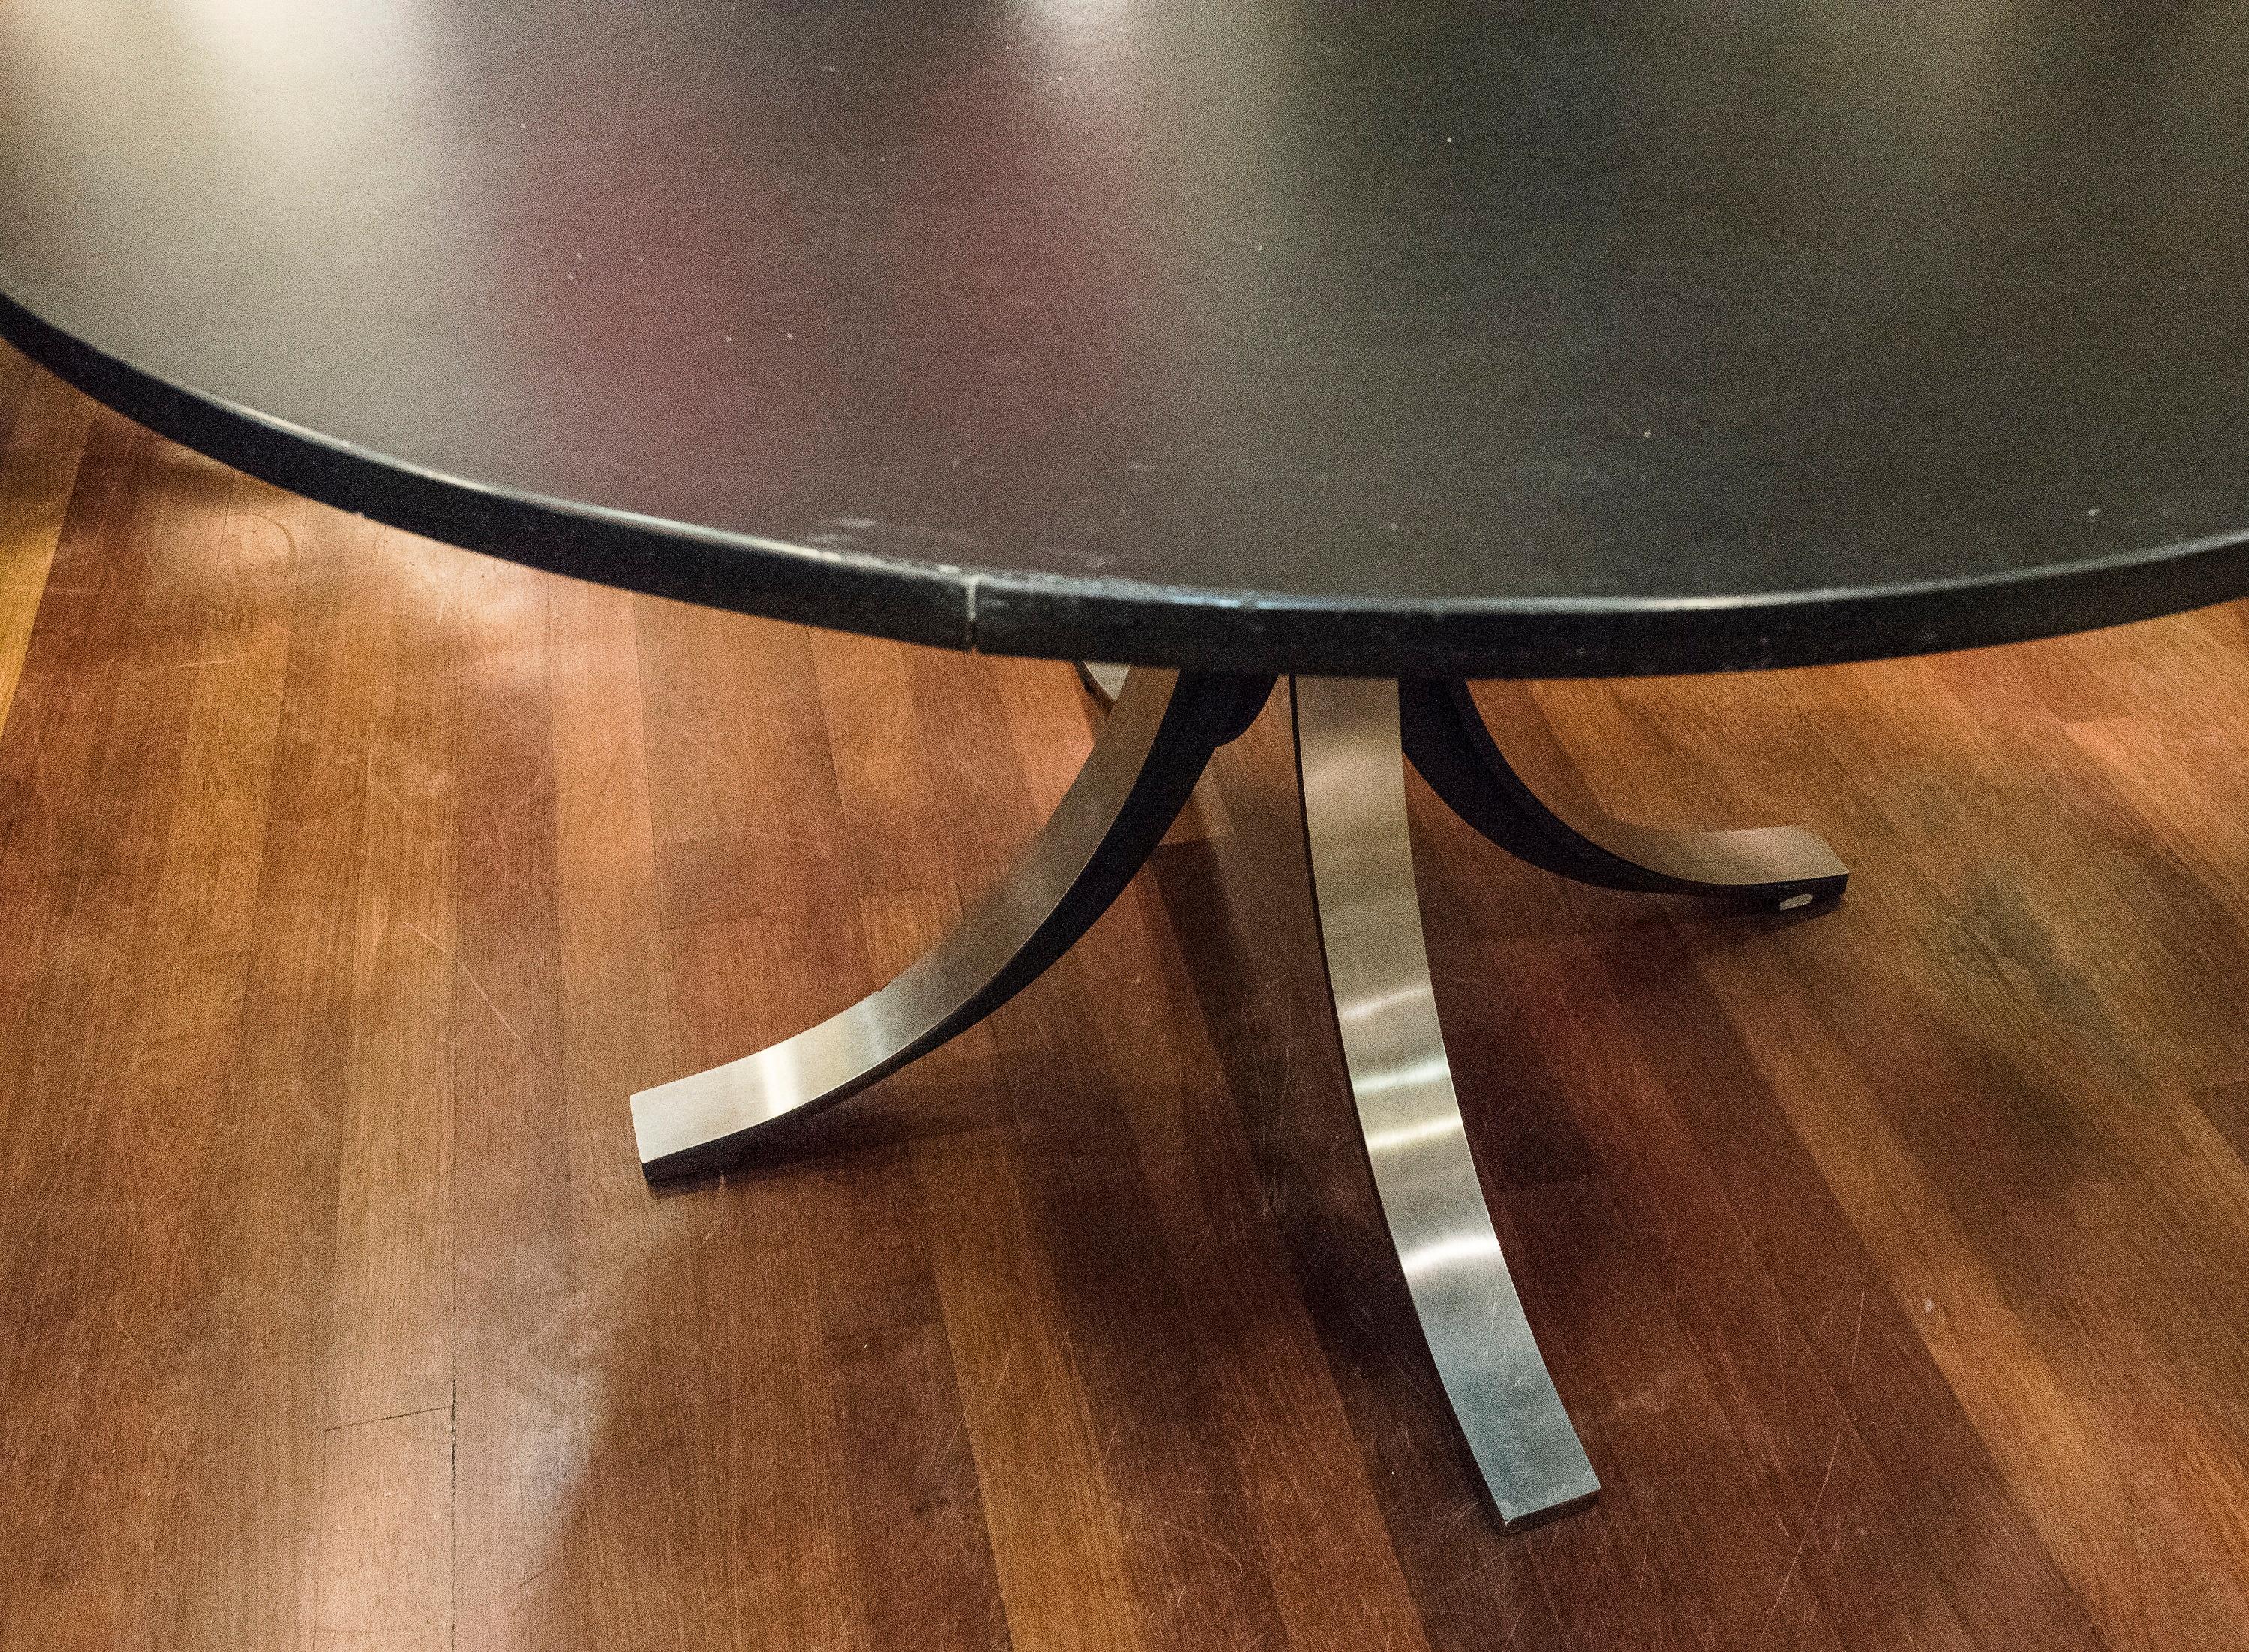 Elegant chrome-plated steel round table by Osvaldo Borssani (1911-1985 Milán)
1970s, from Italy.